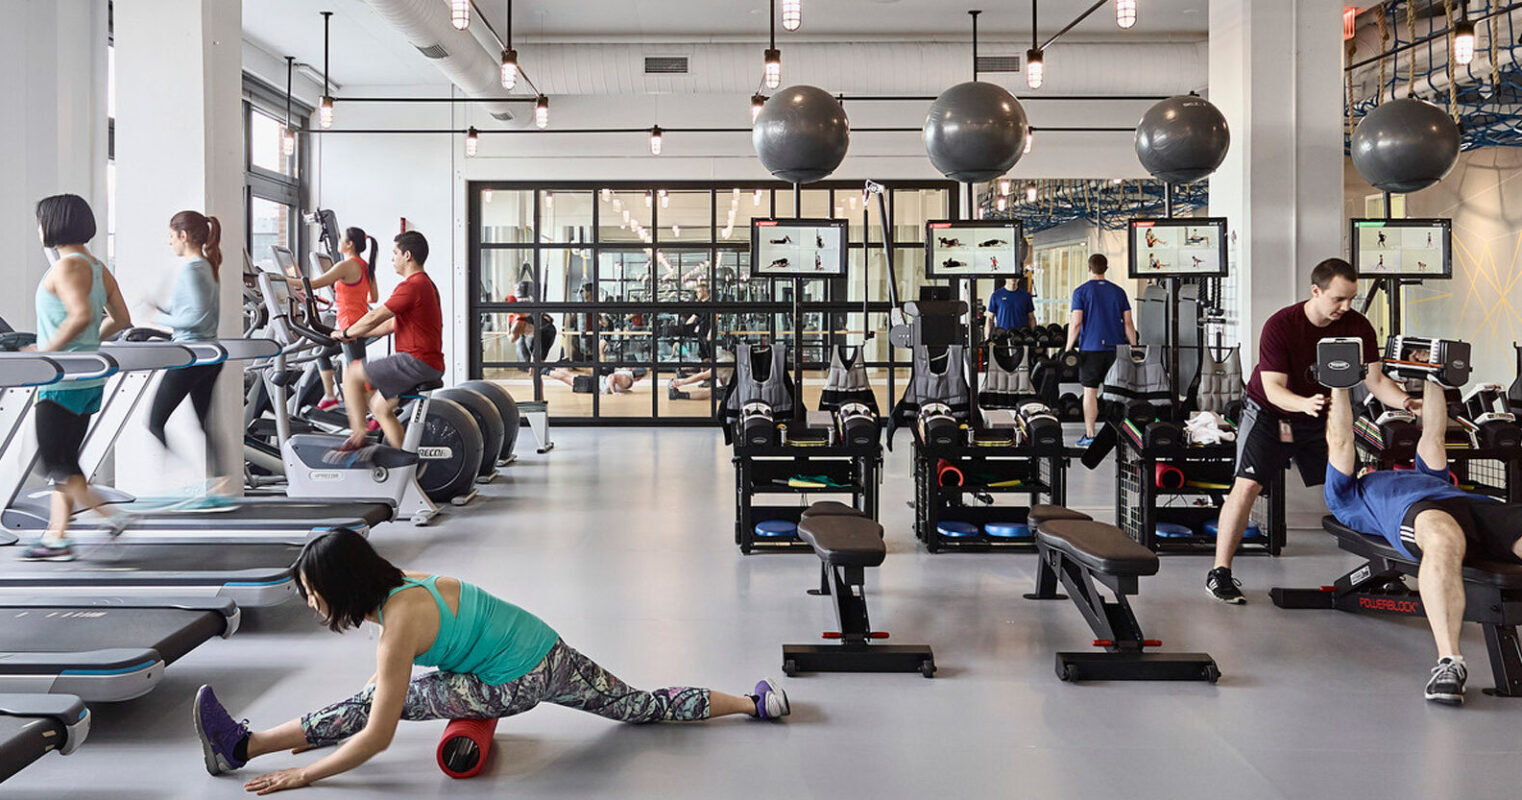 Modern gym interior featuring a variety of exercise equipment, mirrored walls reflecting treadmill users, and an open floor plan with ample natural light. The space is characterized by a clean, industrial aesthetic with exposed ductwork and a contrasting mix of dark and light finishes.